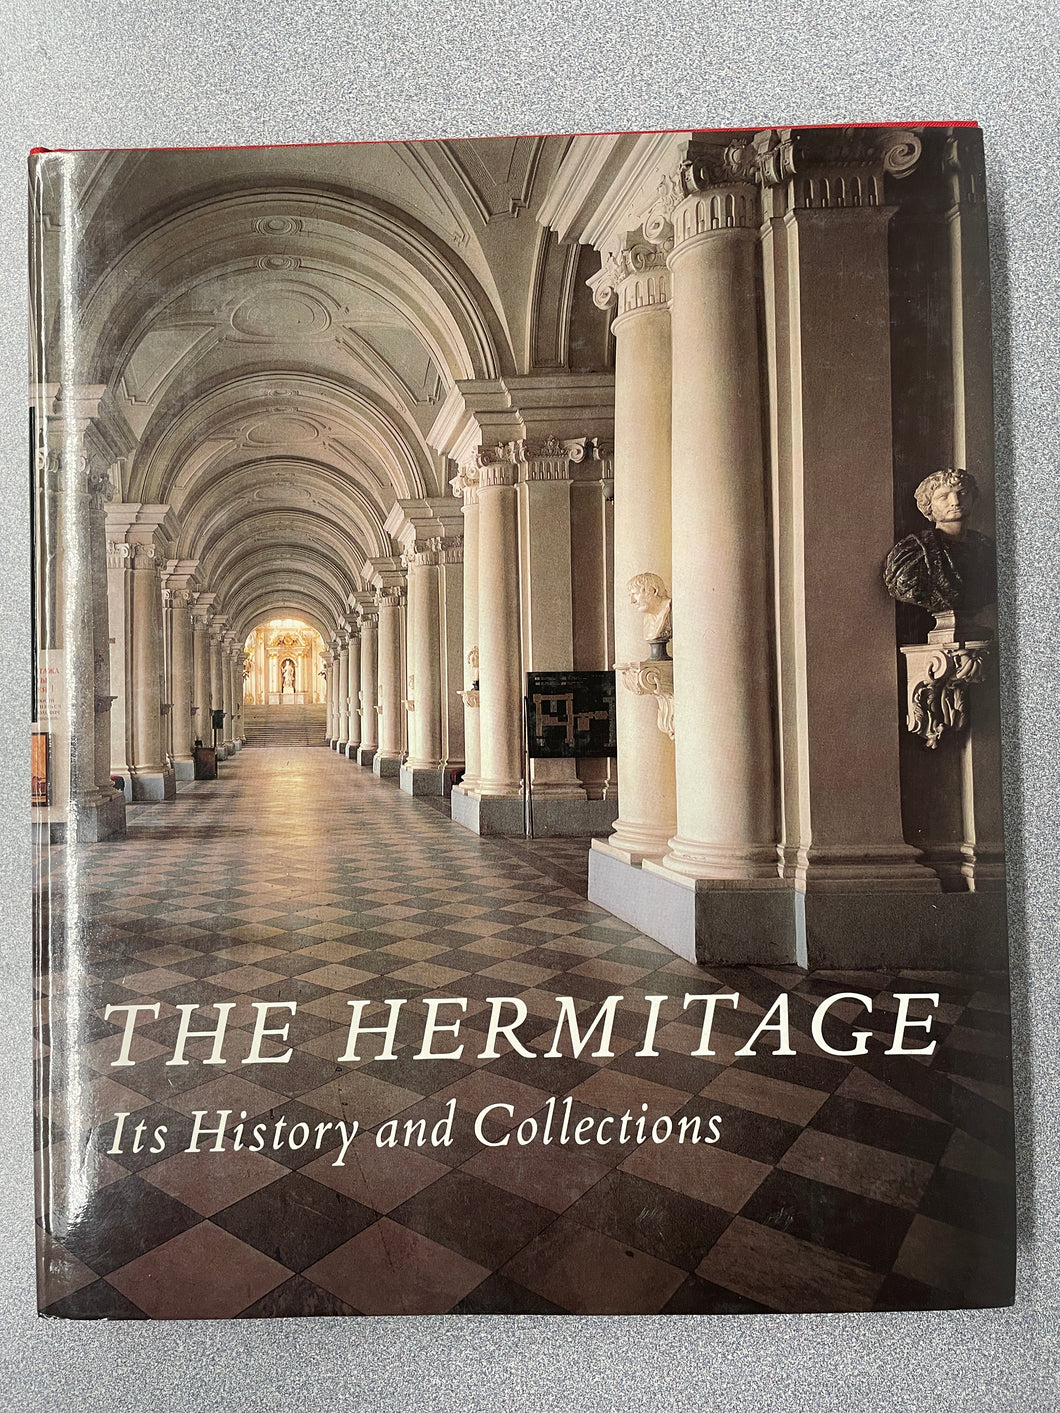 The Hermitage: Its History and Collections, Piotrovsky, Boris [1981] A 5/24